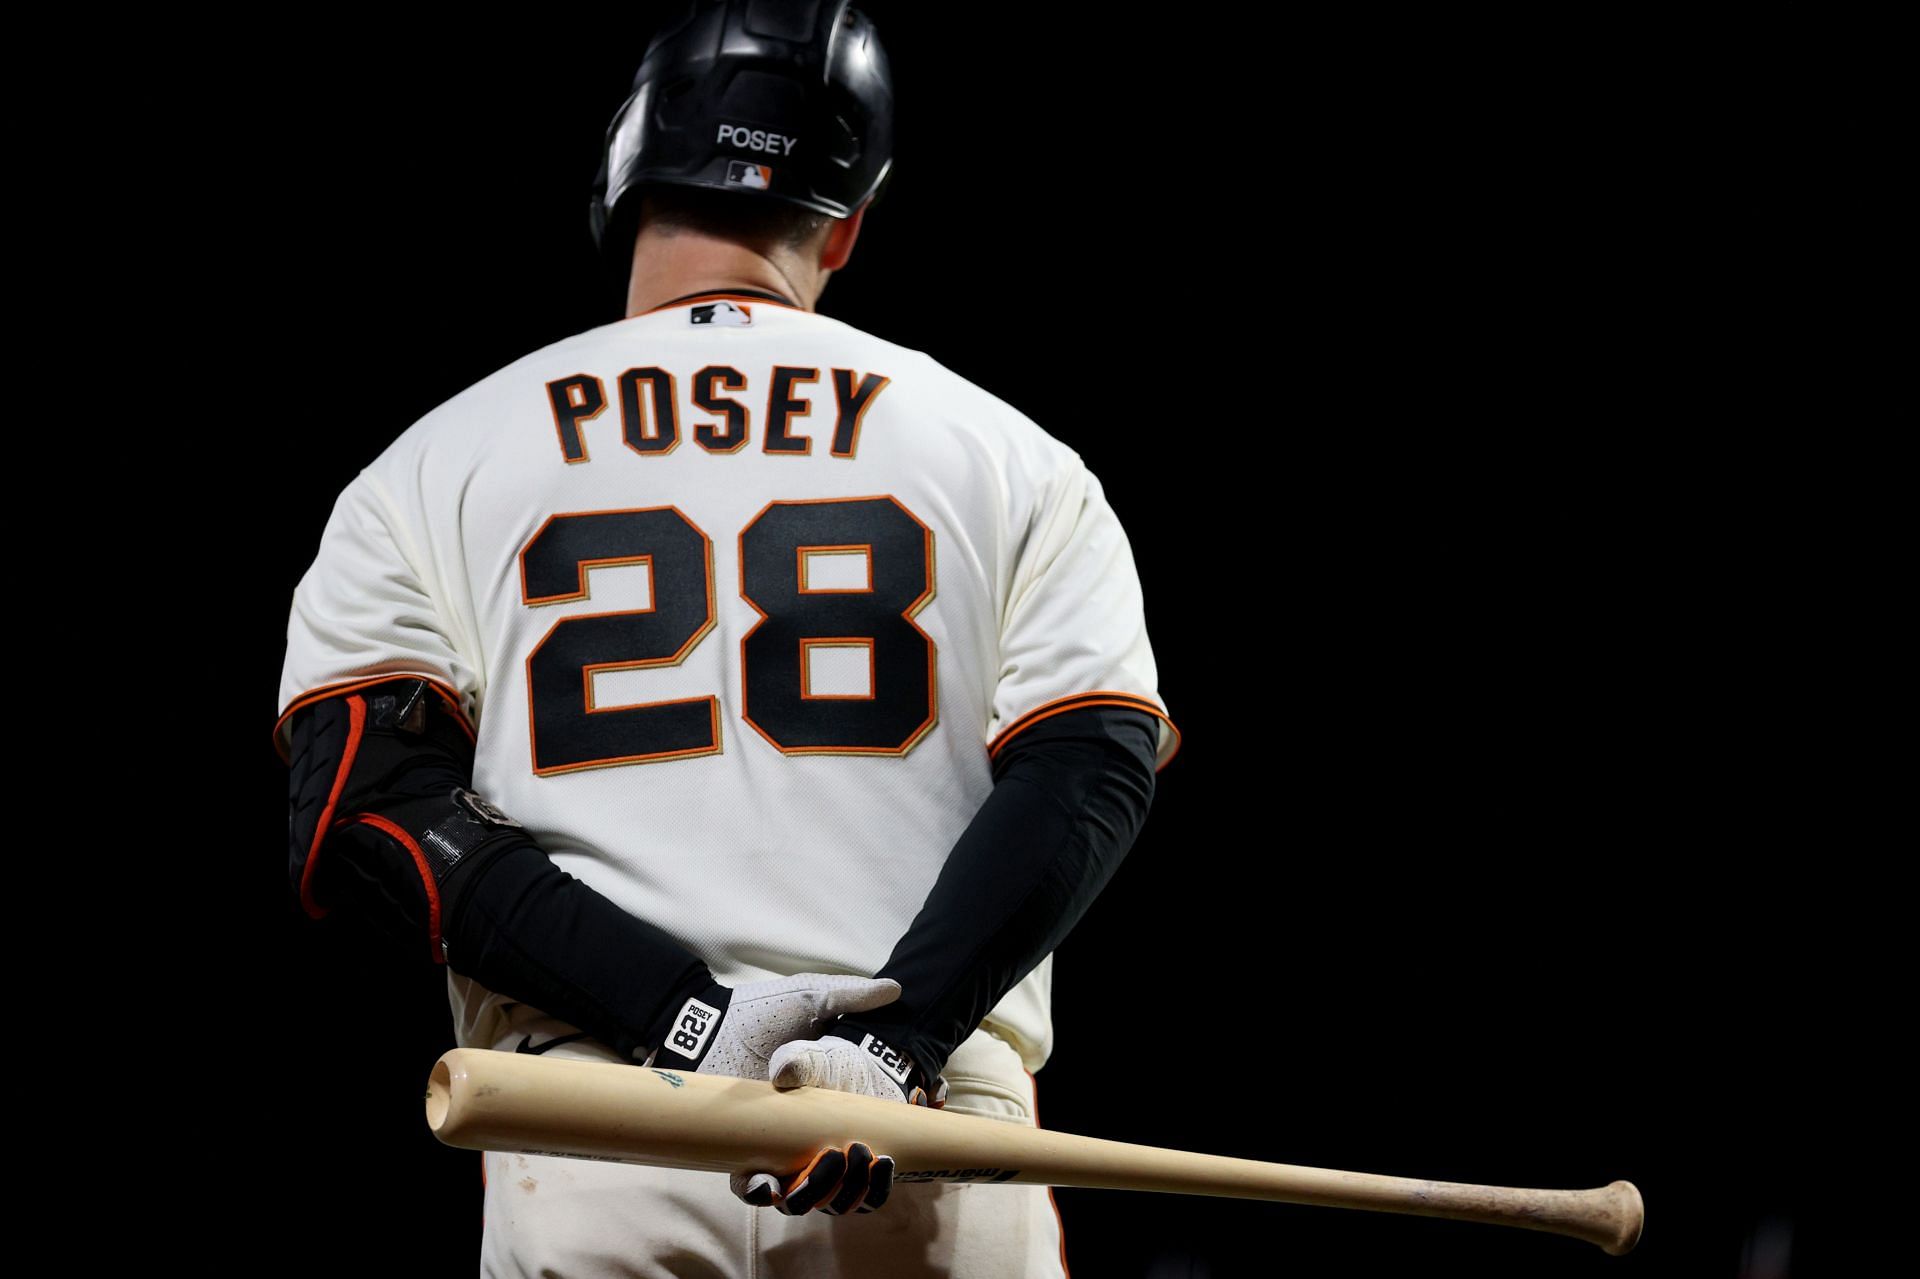 San Francisco Giants catcher Buster Posey (Image via Getty)